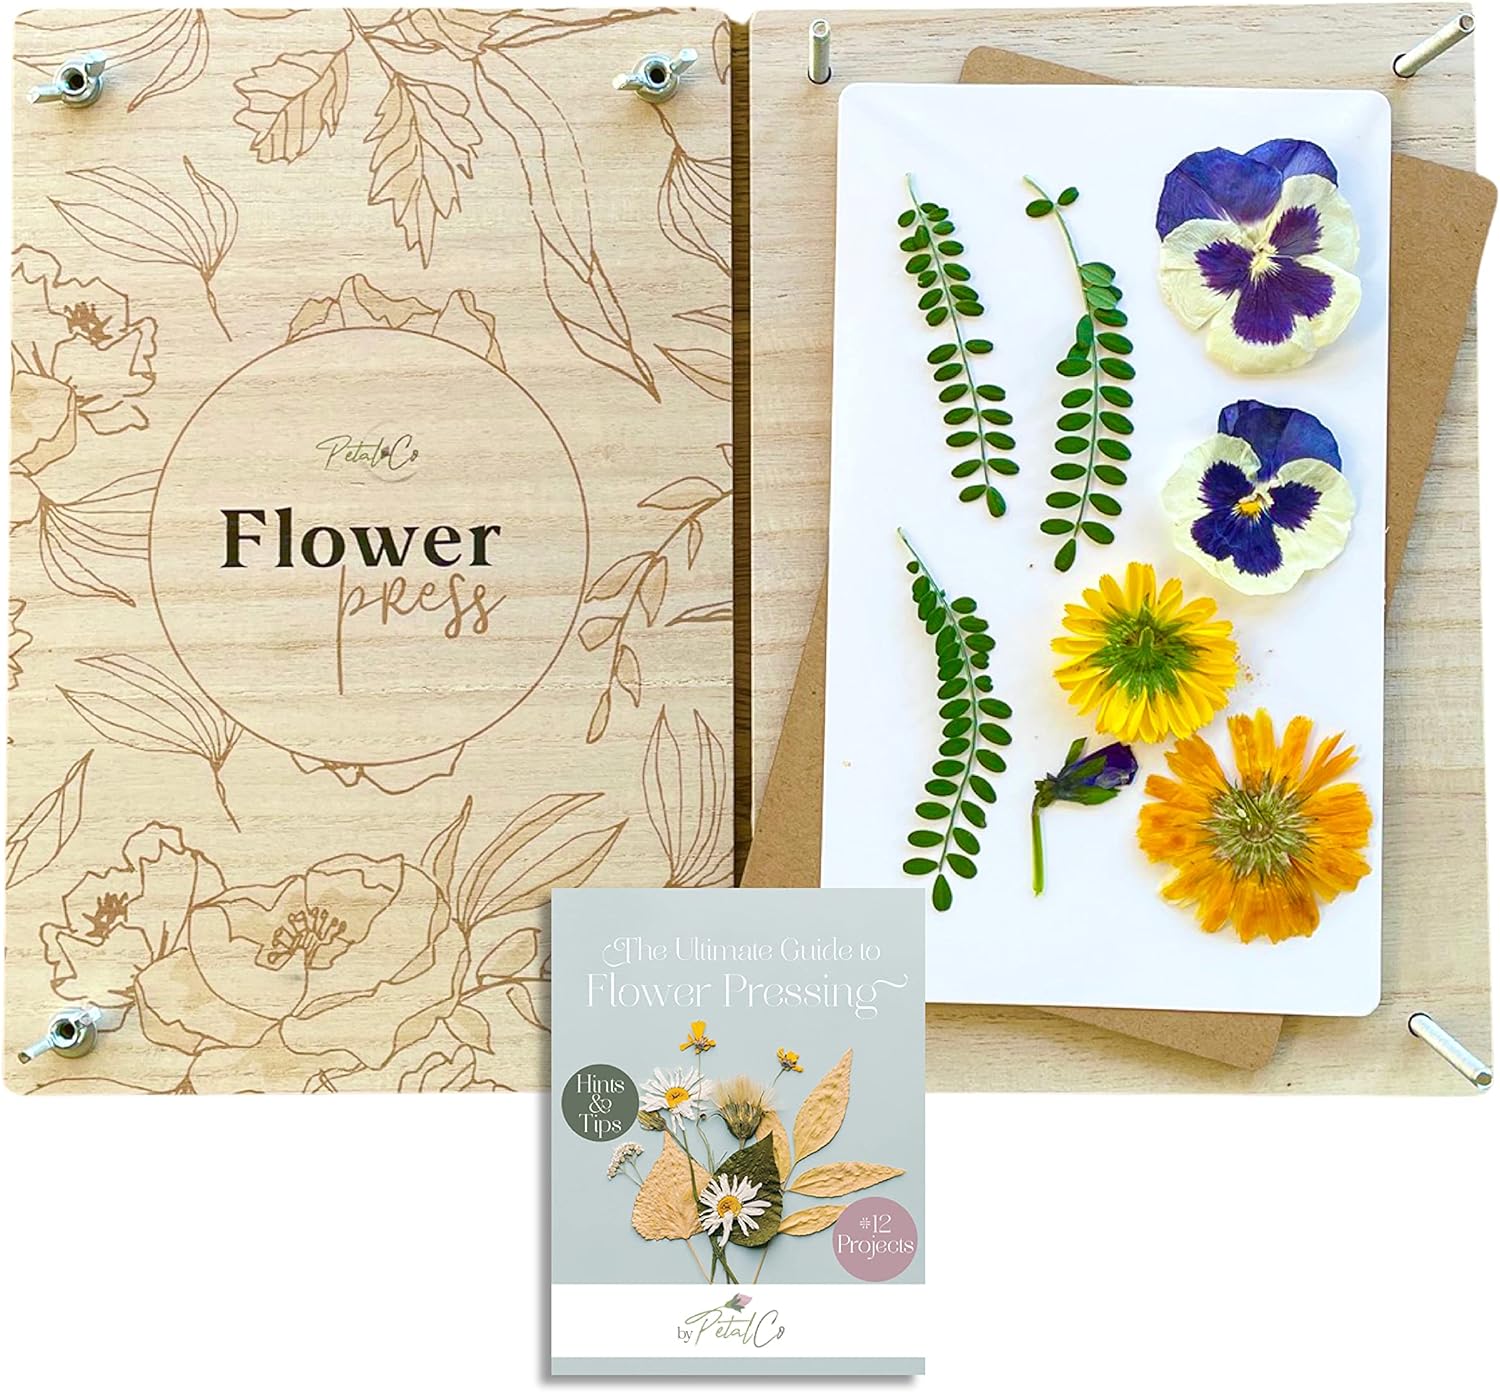 Petal Co Wooden Leaf, Plant, Flower Press Kit & EBook - Large 7x10 inch, 7 Layer Press, Great Gift for Creative Plant Lovers, Kids & Adults, Educational Activity, Outdoor Crafts